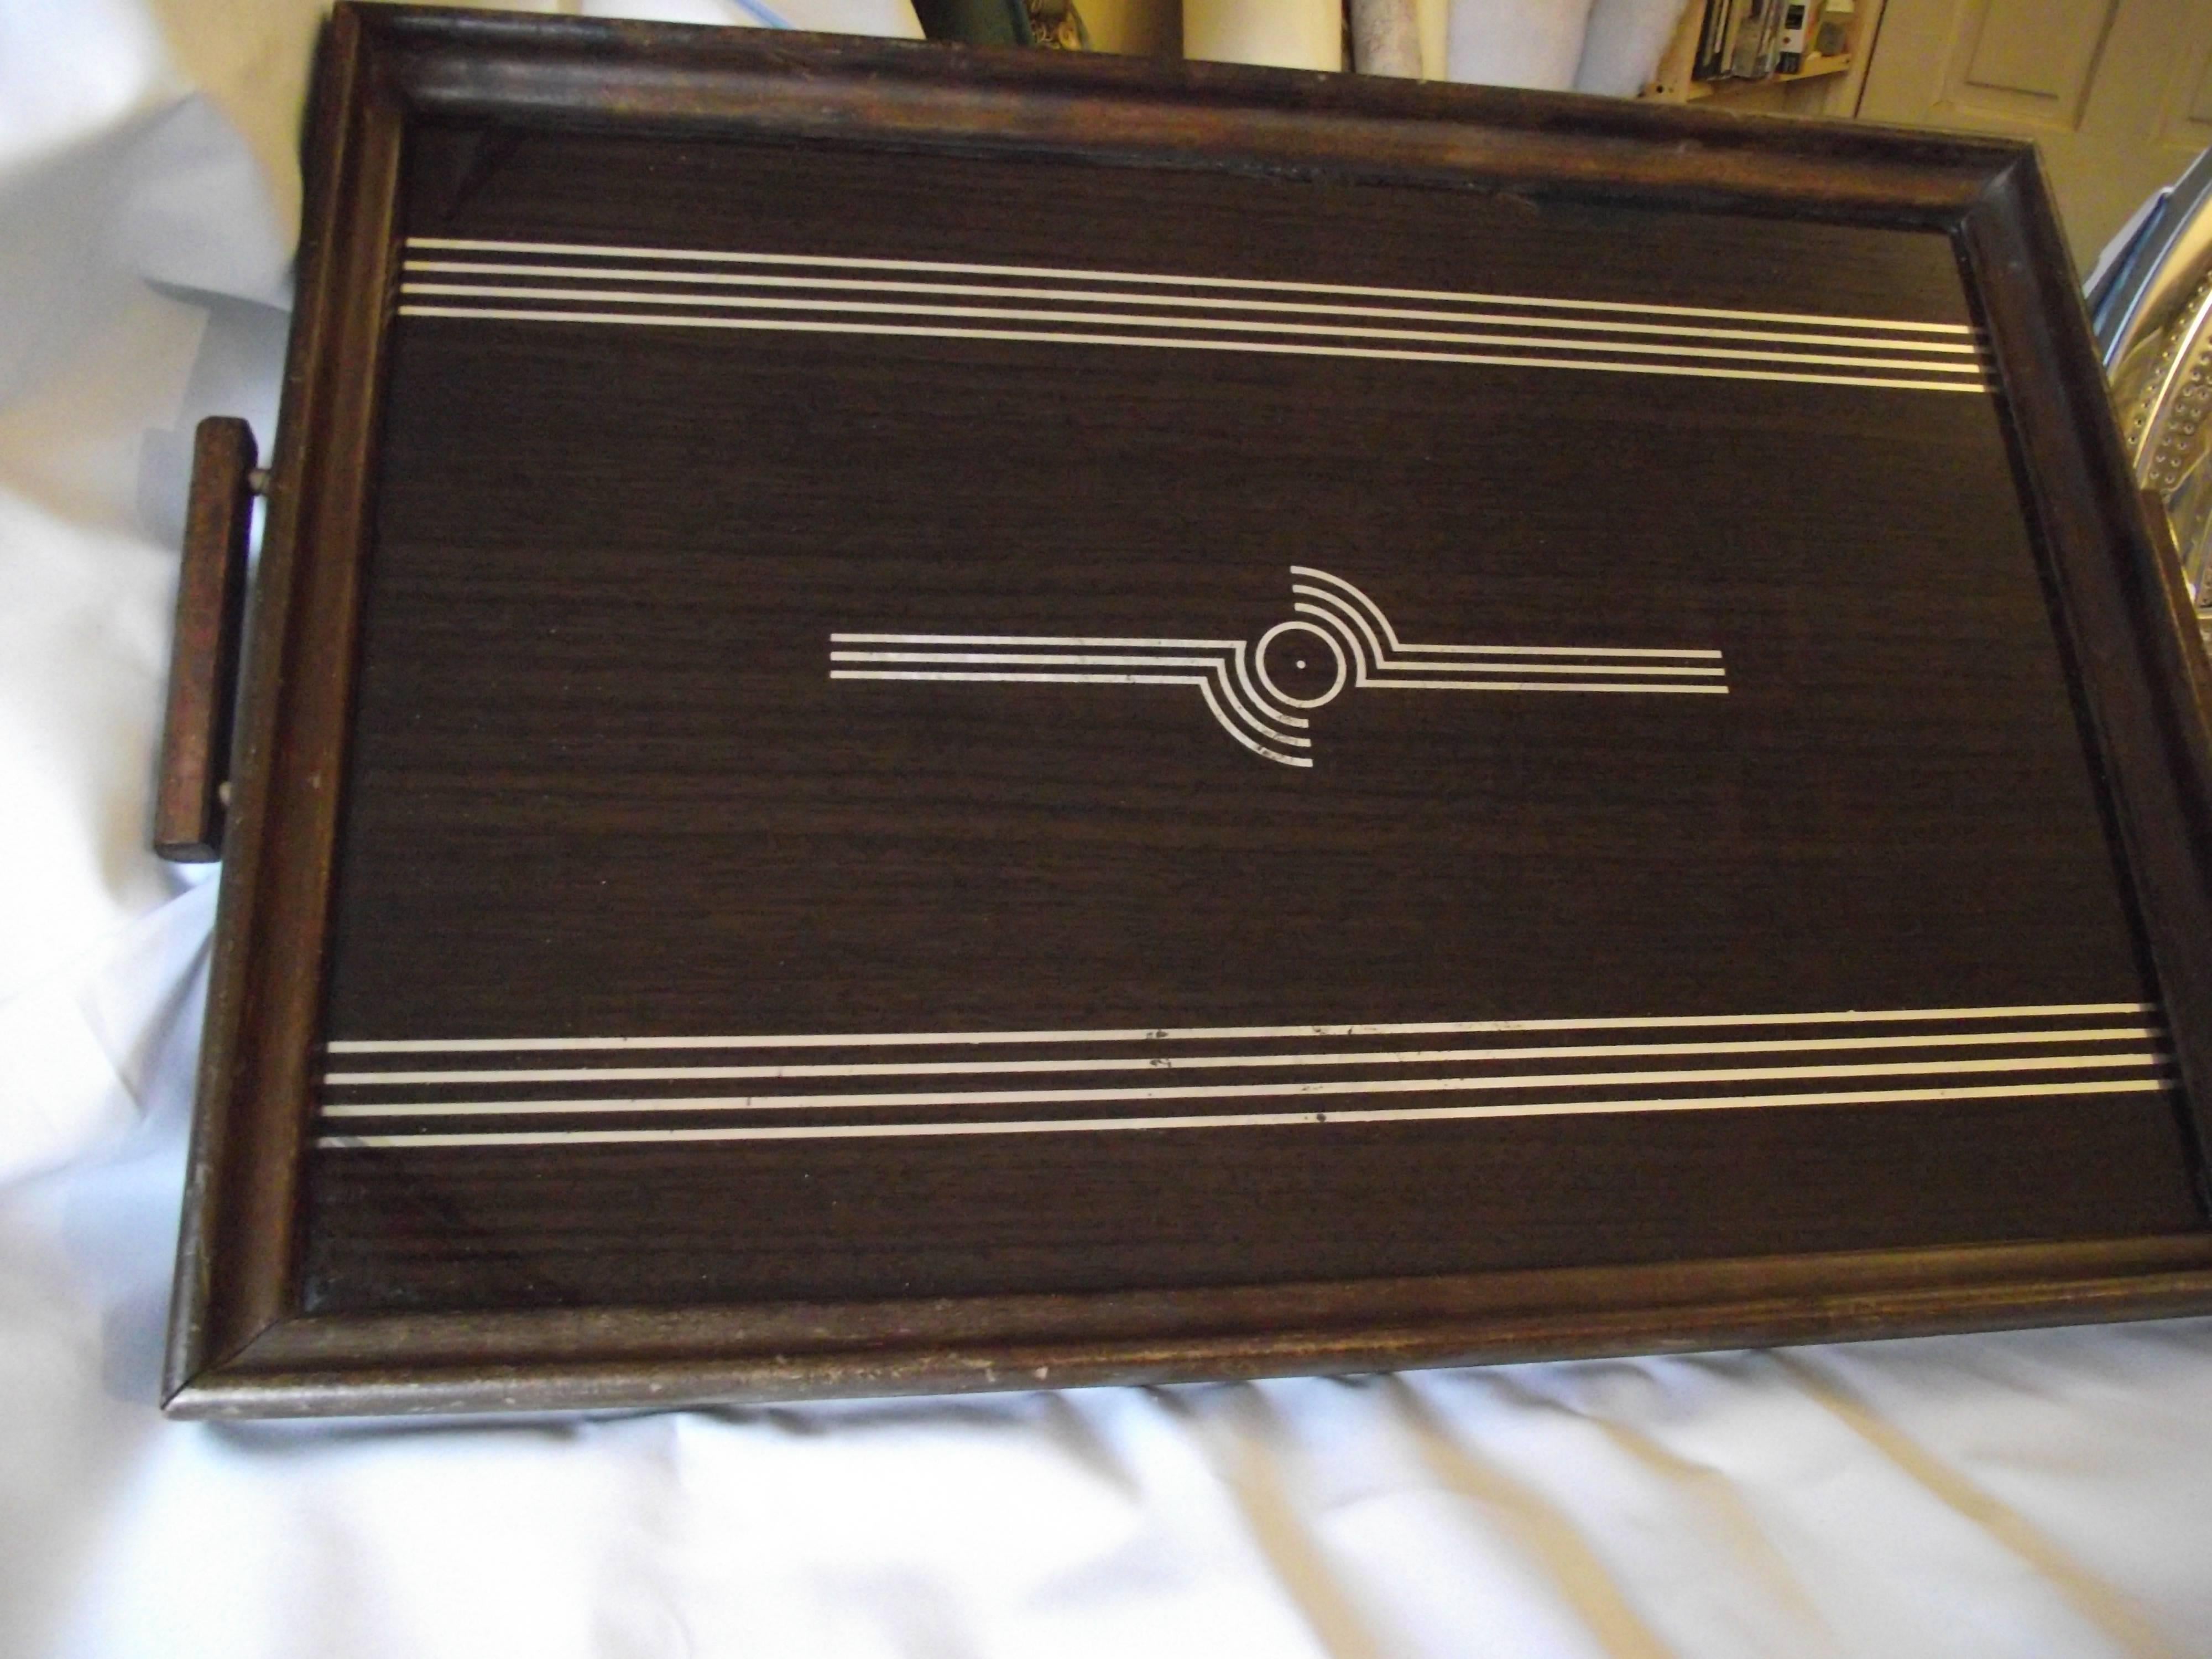 This Art Deco tray is outstanding. The reverse painted glass surface features a great Art Deco mirror design surrounded by a painted faux wood grain. I tried to capture in the pictures an almost unnoticeable repair to the wood grain treatment in the